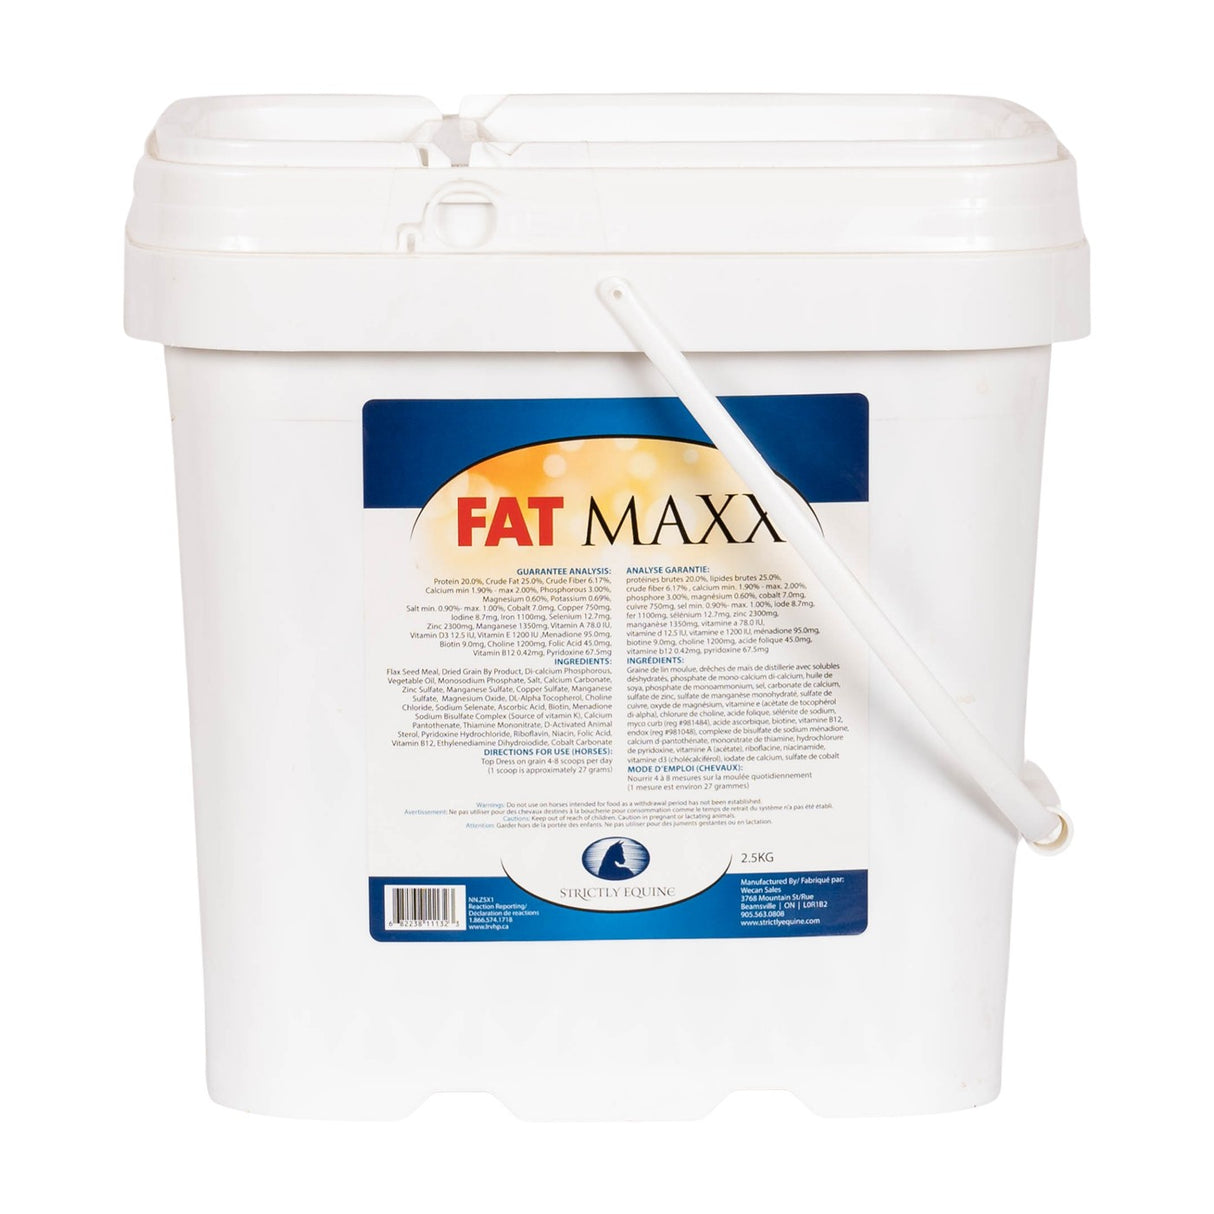 Strictly Equine Fat Maxx 2.5 Kg